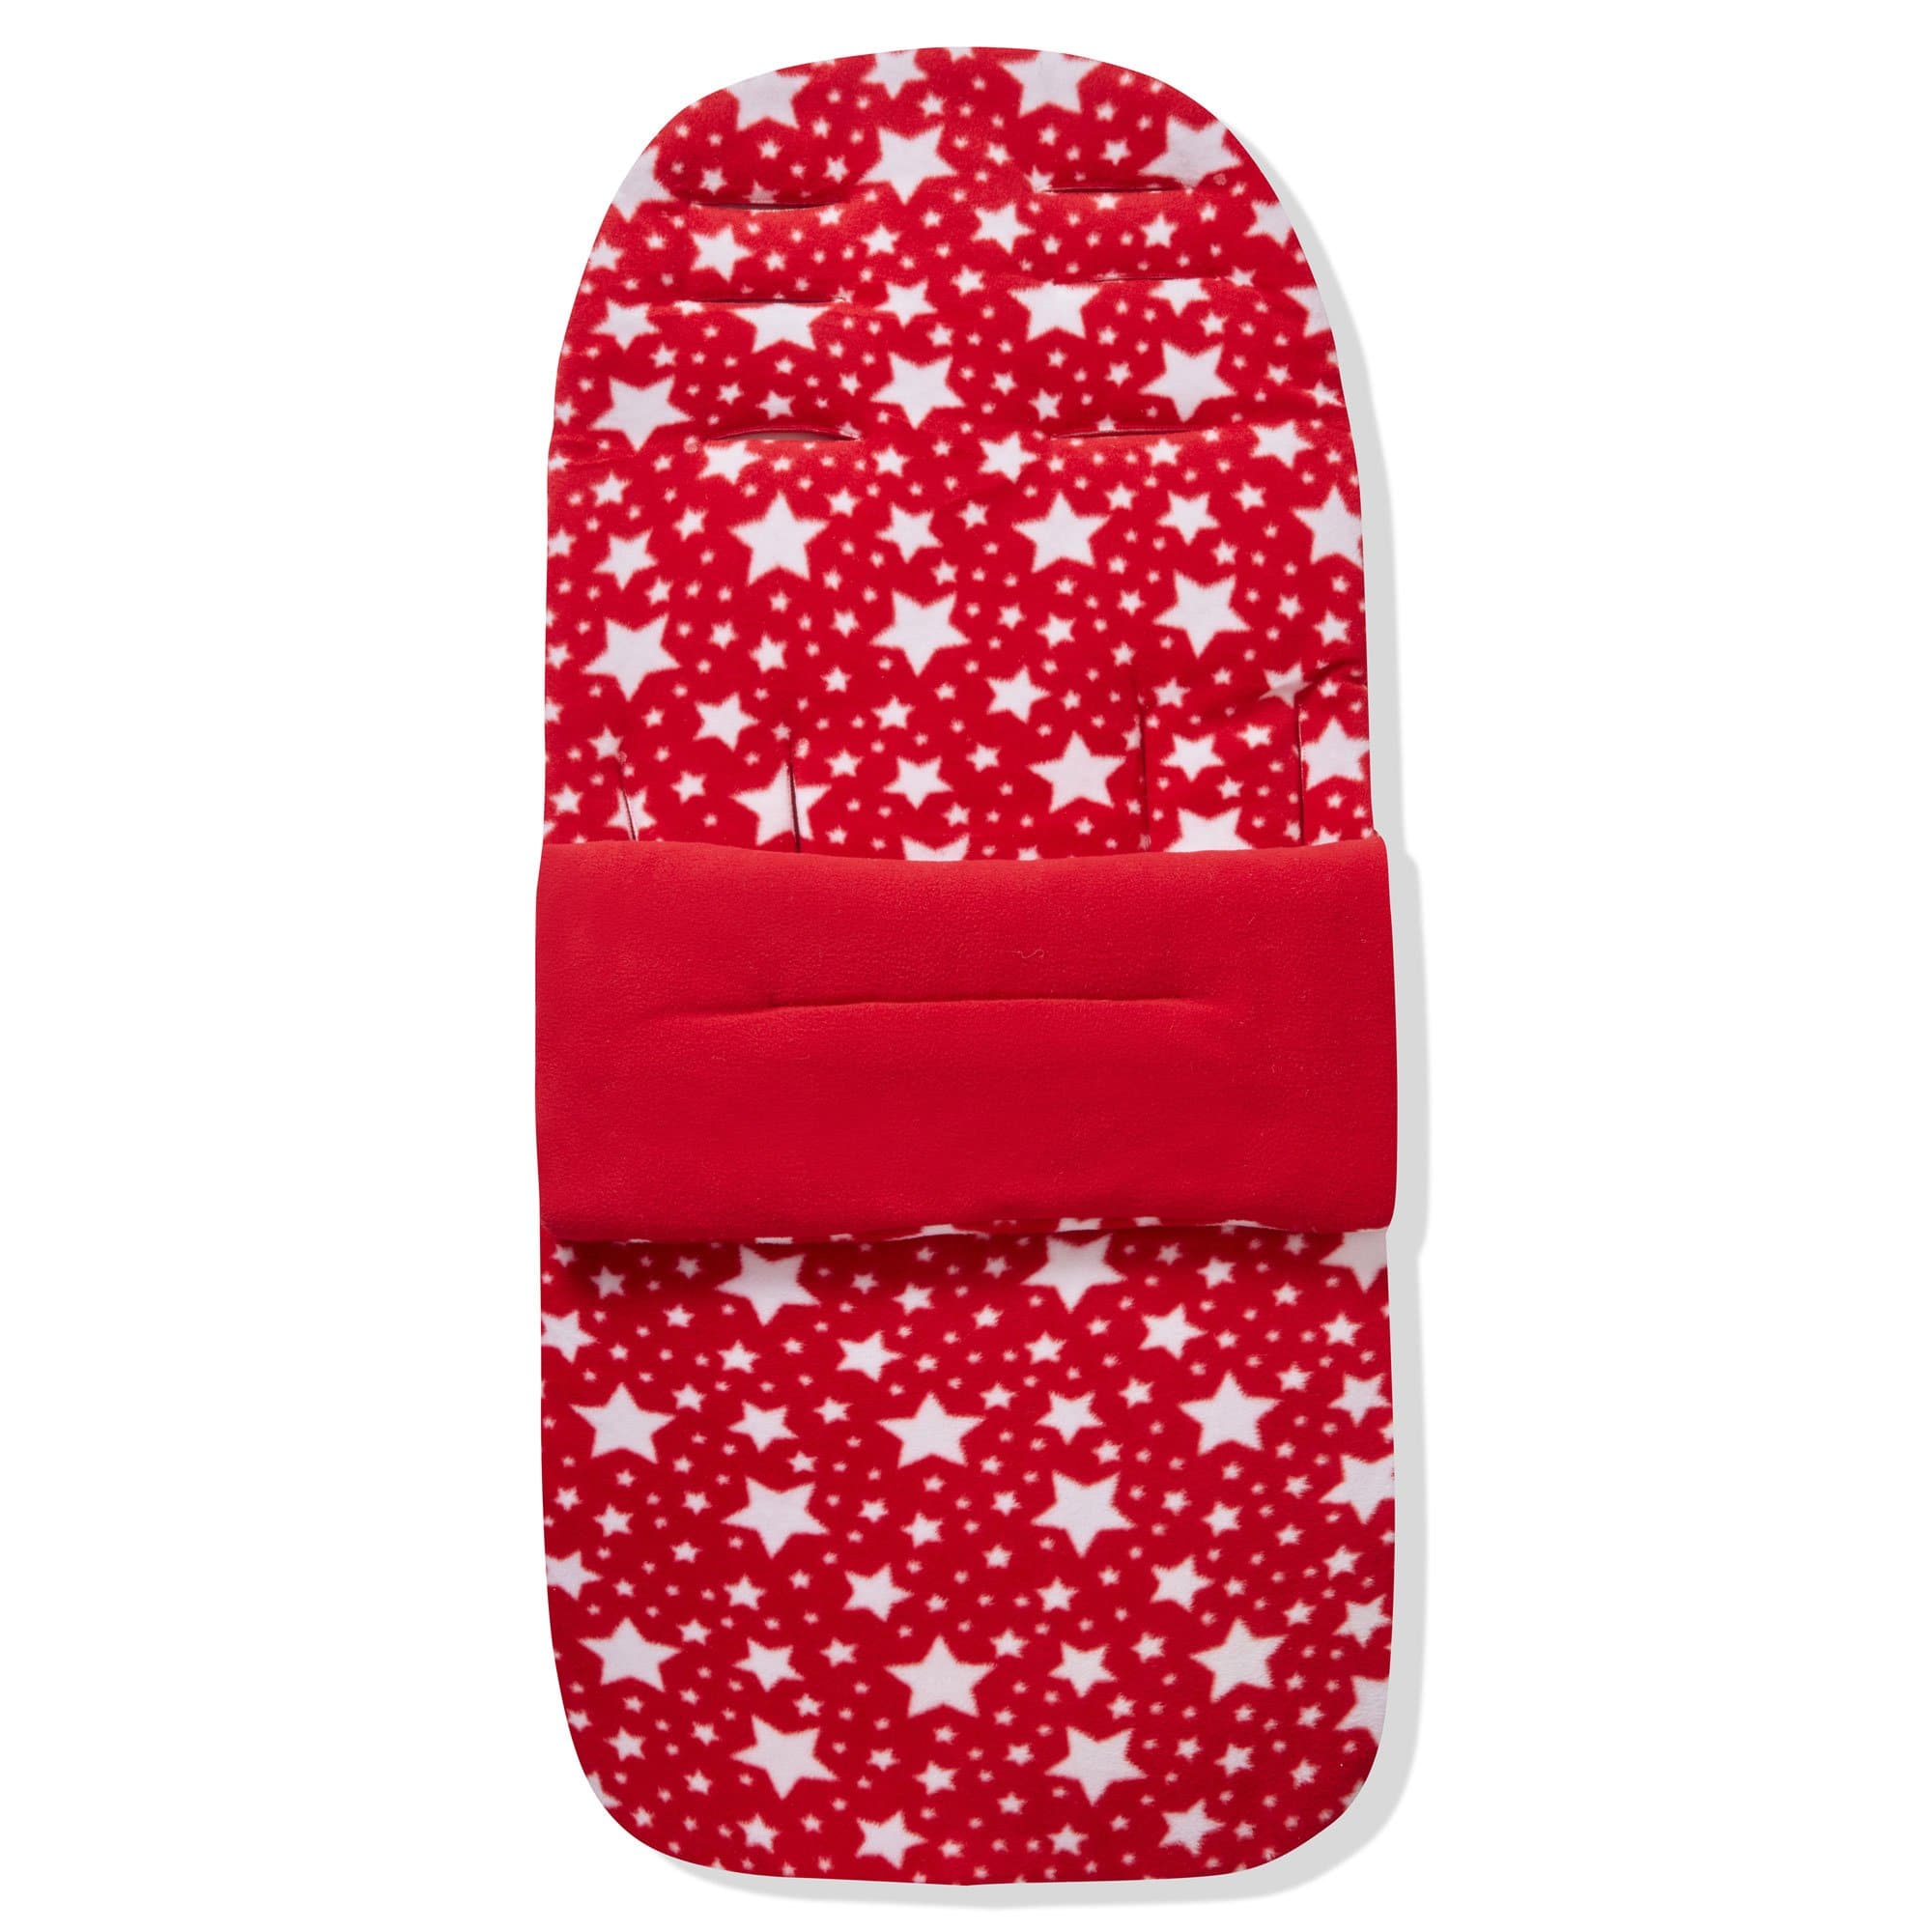 Fleece Footmuff / Cosy Toes Compatible with Baby Elegance - For Your Little One